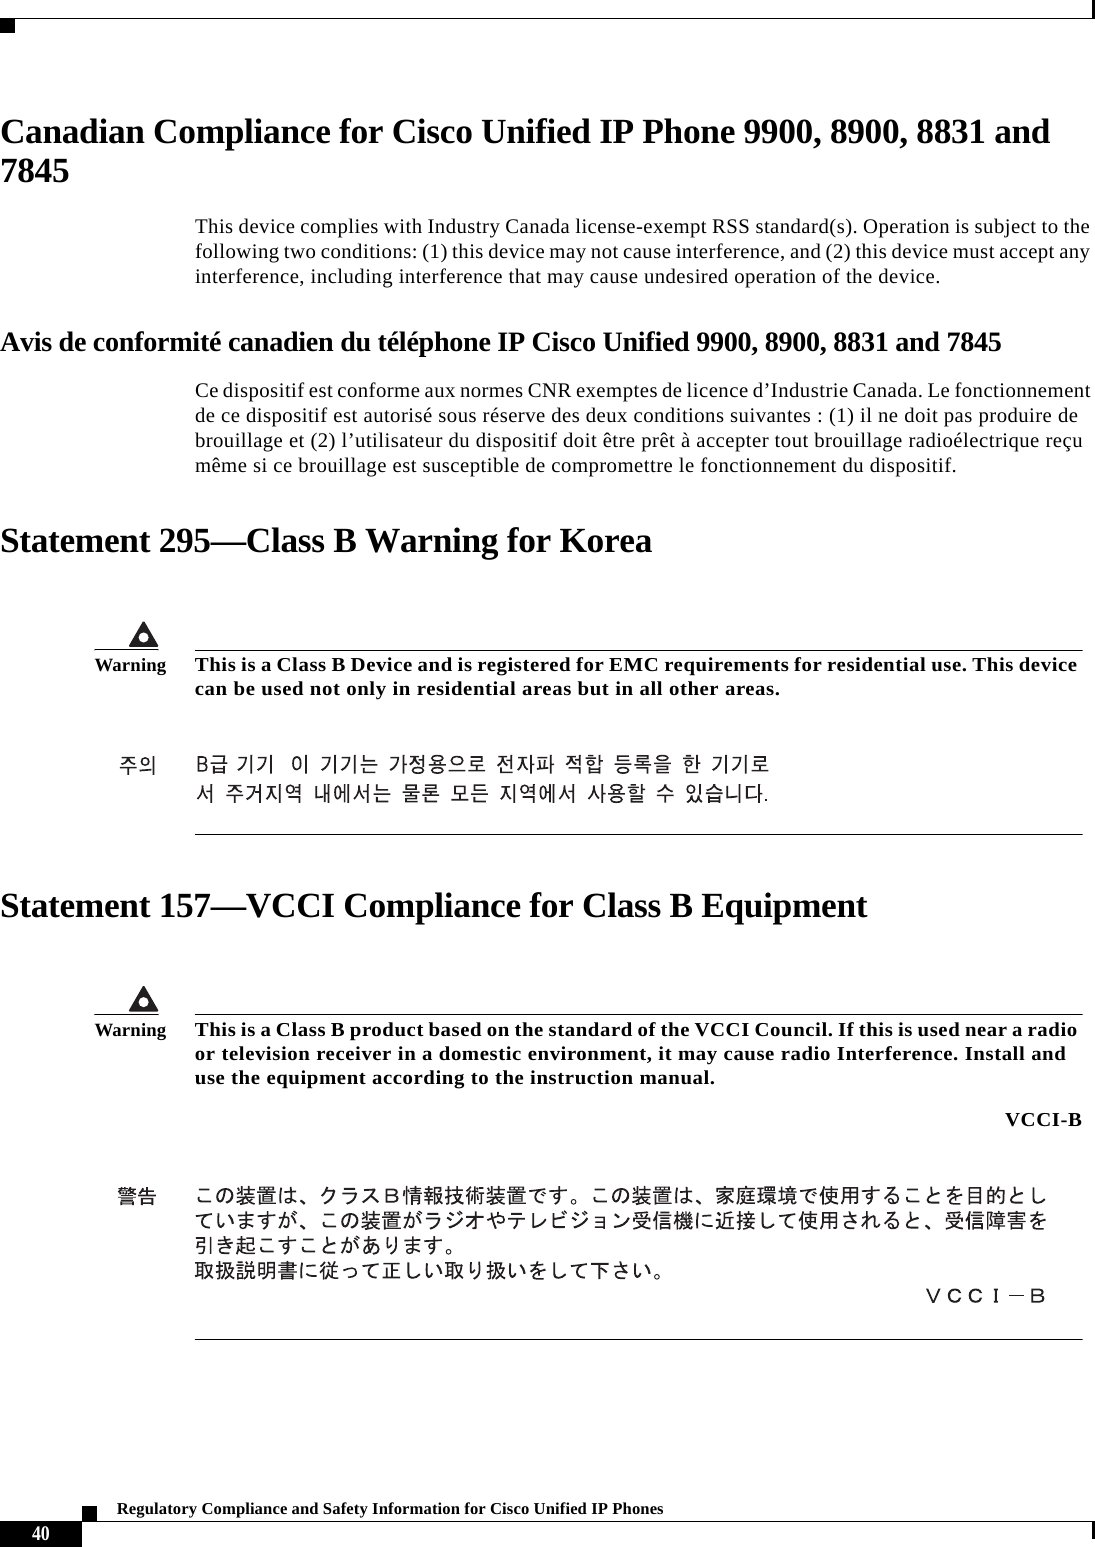  40Regulatory Compliance and Safety Information for Cisco Unified IP PhonesCanadian Compliance for Cisco Unified IP Phone 9900, 8900, 8831 and 7845This device complies with Industry Canada license-exempt RSS standard(s). Operation is subject to the following two conditions: (1) this device may not cause interference, and (2) this device must accept any interference, including interference that may cause undesired operation of the device.Avis de conformité canadien du téléphone IP Cisco Unified 9900, 8900, 8831 and 7845Ce dispositif est conforme aux normes CNR exemptes de licence d’Industrie Canada. Le fonctionnement de ce dispositif est autorisé sous réserve des deux conditions suivantes : (1) il ne doit pas produire de brouillage et (2) l’utilisateur du dispositif doit être prêt à accepter tout brouillage radioélectrique reçu même si ce brouillage est susceptible de compromettre le fonctionnement du dispositif.Statement 295—Class B Warning for KoreaStatement 157—VCCI Compliance for Class B EquipmentWarningThis is a Class B Device and is registered for EMC requirements for residential use. This device can be used not only in residential areas but in all other areas.WarningThis is a Class B product based on the standard of the VCCI Council. If this is used near a radio or television receiver in a domestic environment, it may cause radio Interference. Install and use the equipment according to the instruction manual. VCCI-B